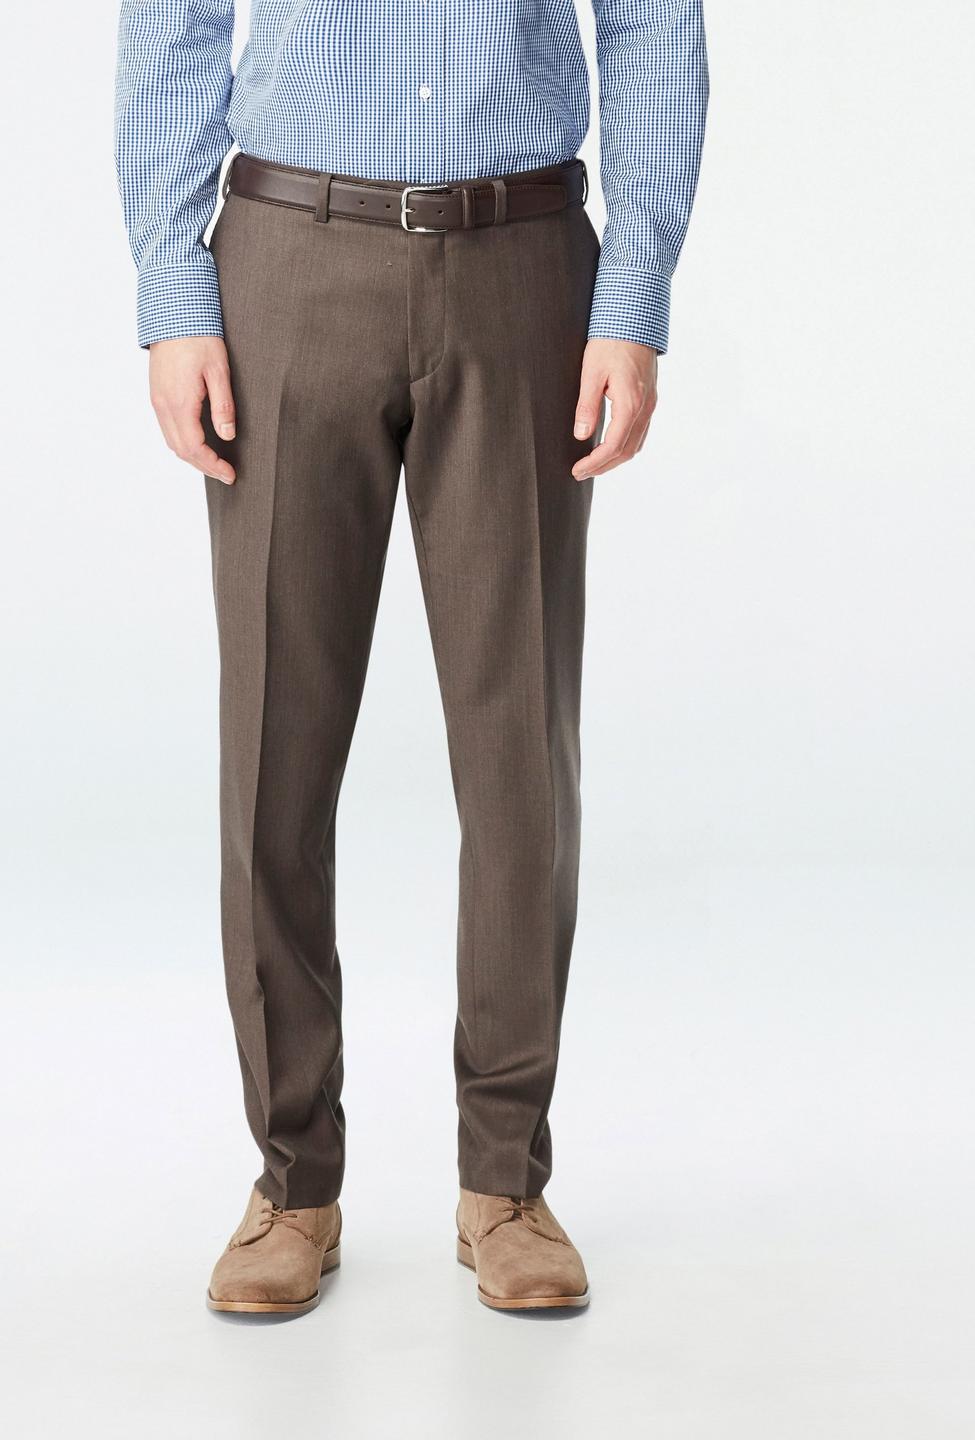 Brown pants - Hemsworth Solid Design from Premium Indochino Collection